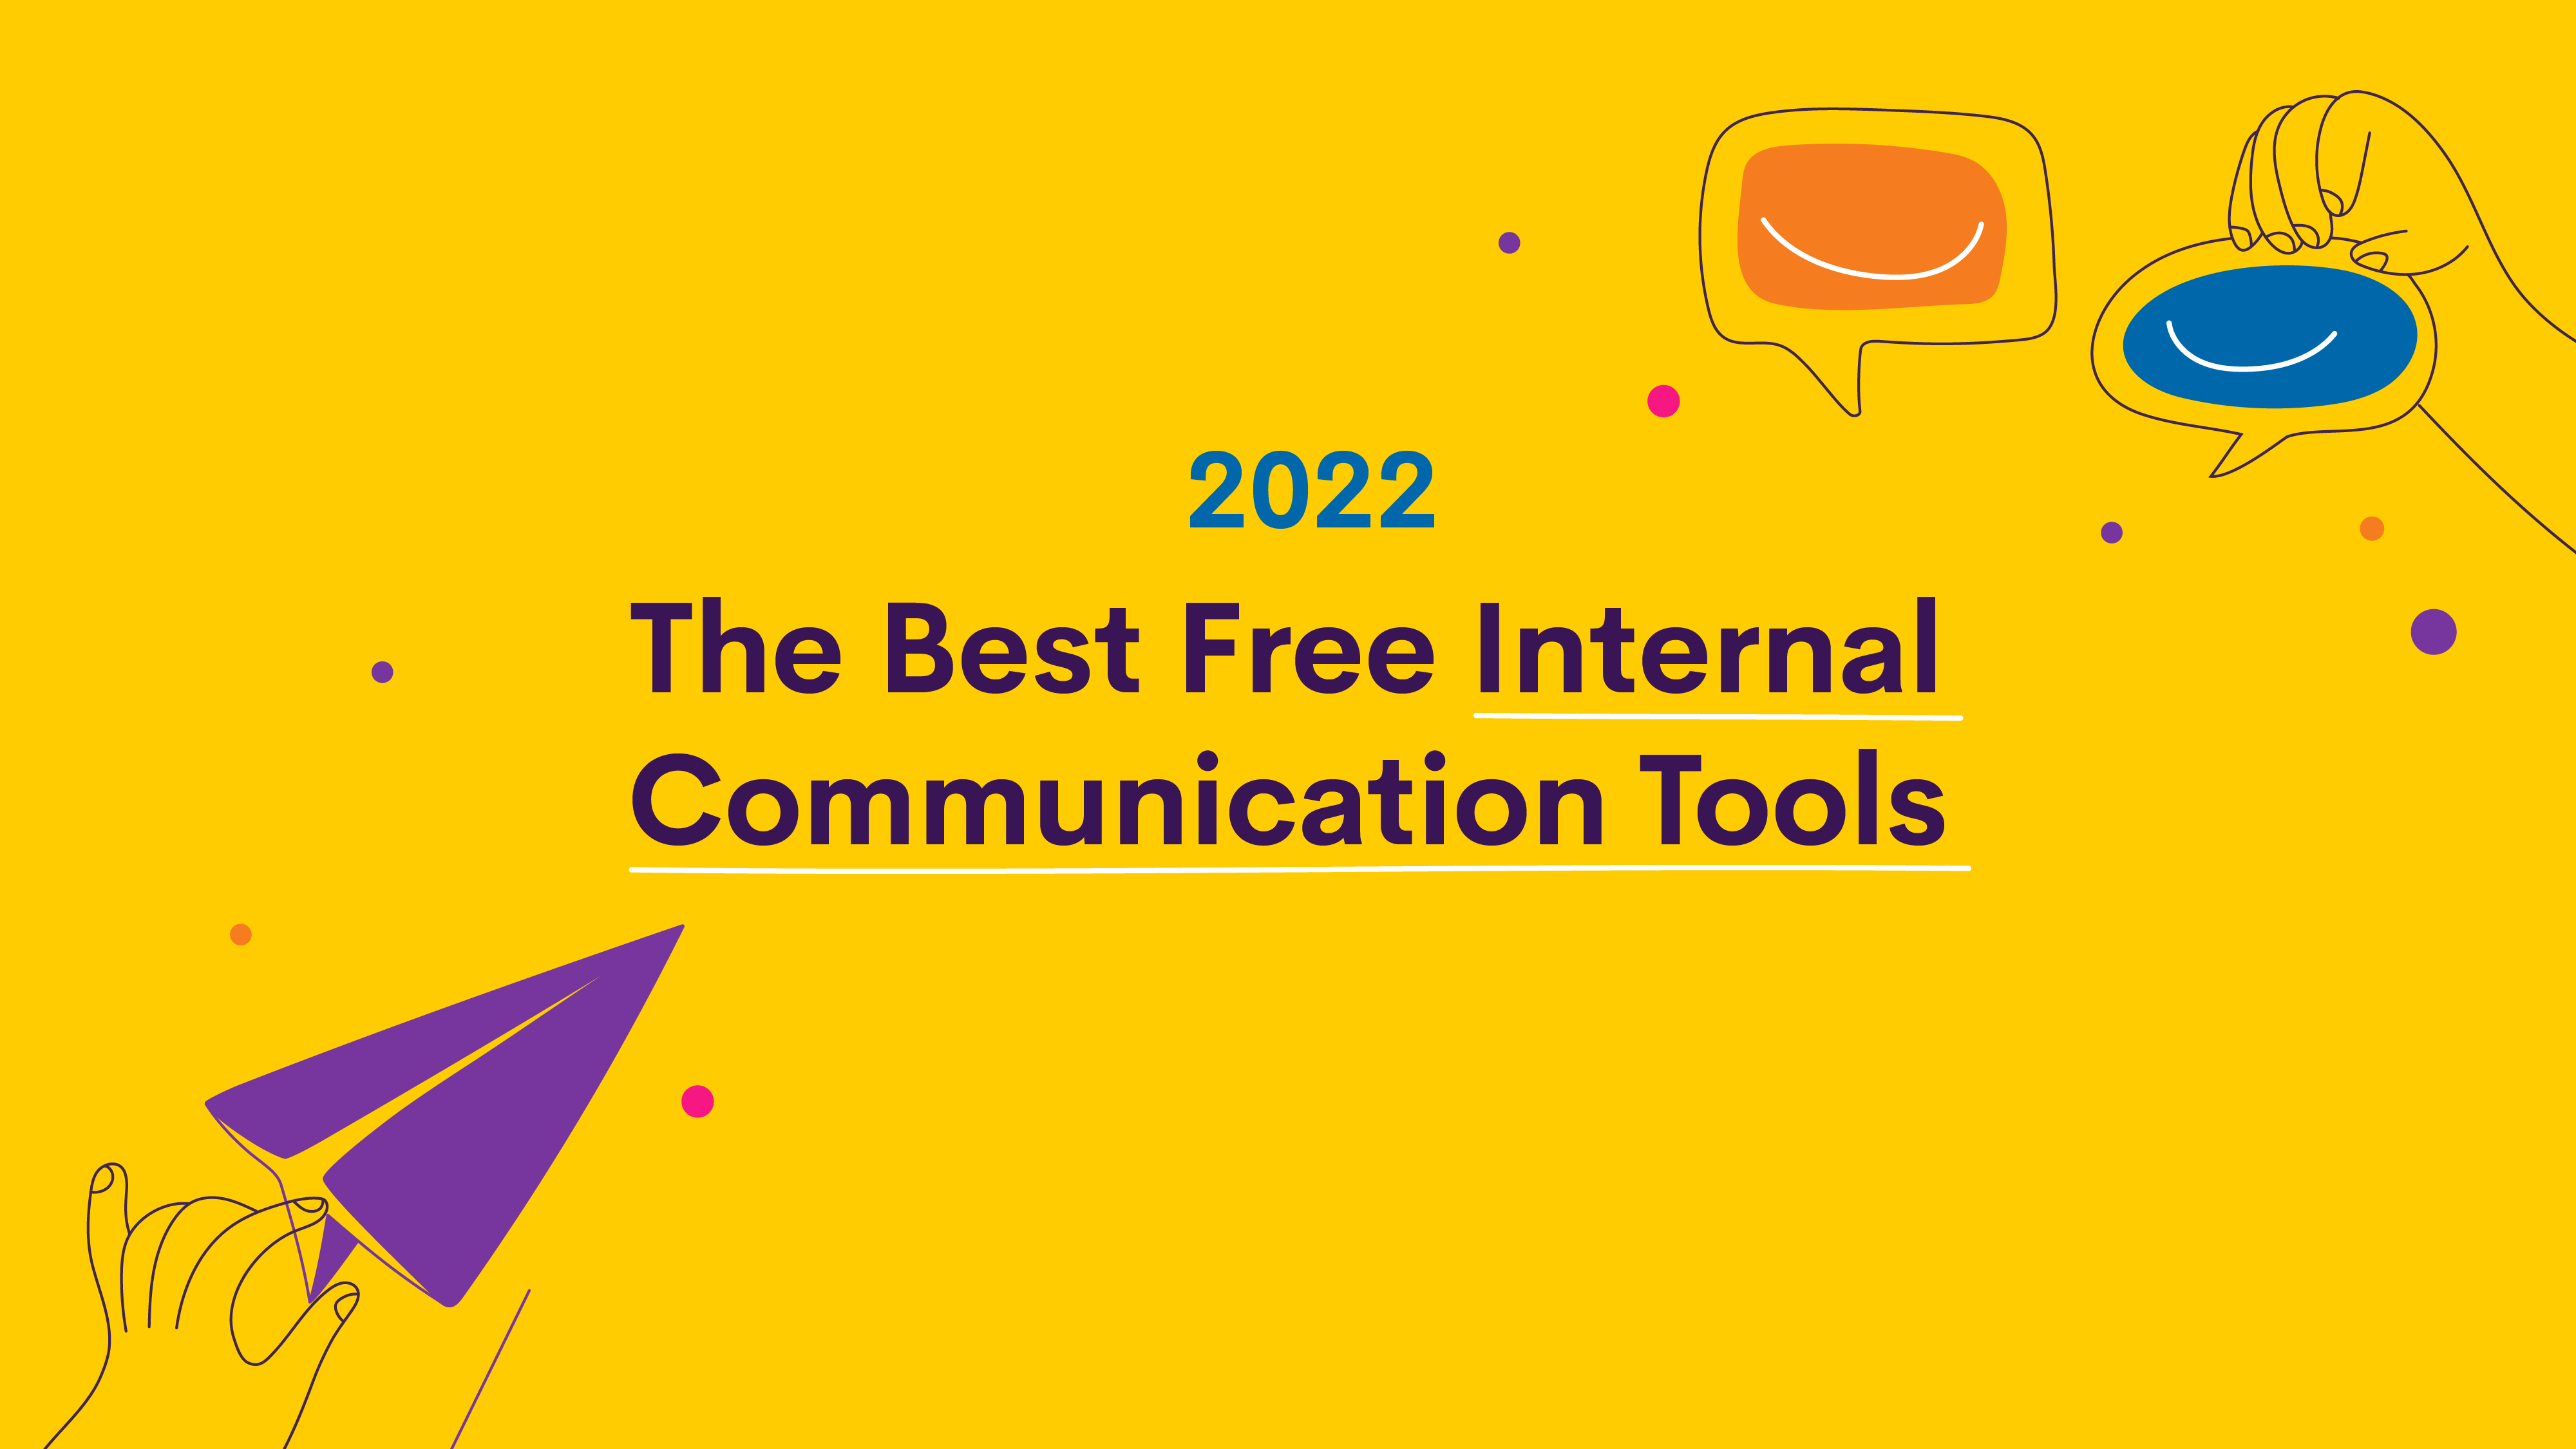 63 Free Internal Communication Tools and Resources for 2023